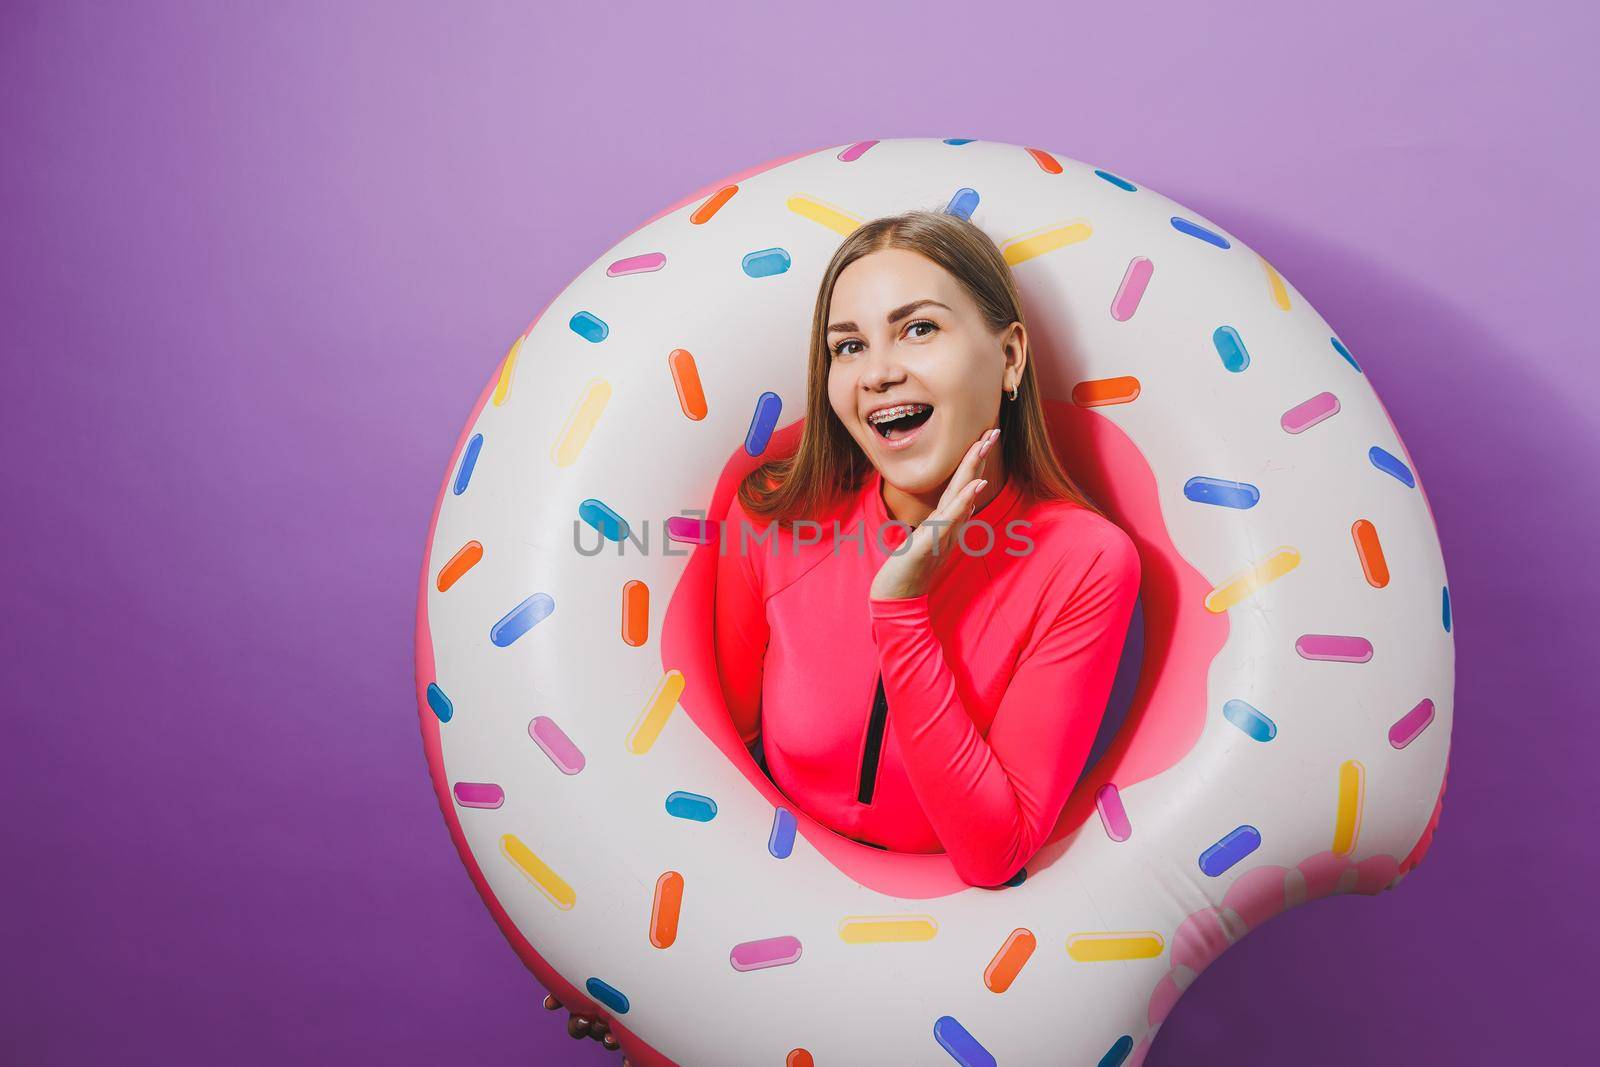 Slim young woman in a stylish pink swimsuit with a donut inflatable ring on a plain background. by Dmitrytph